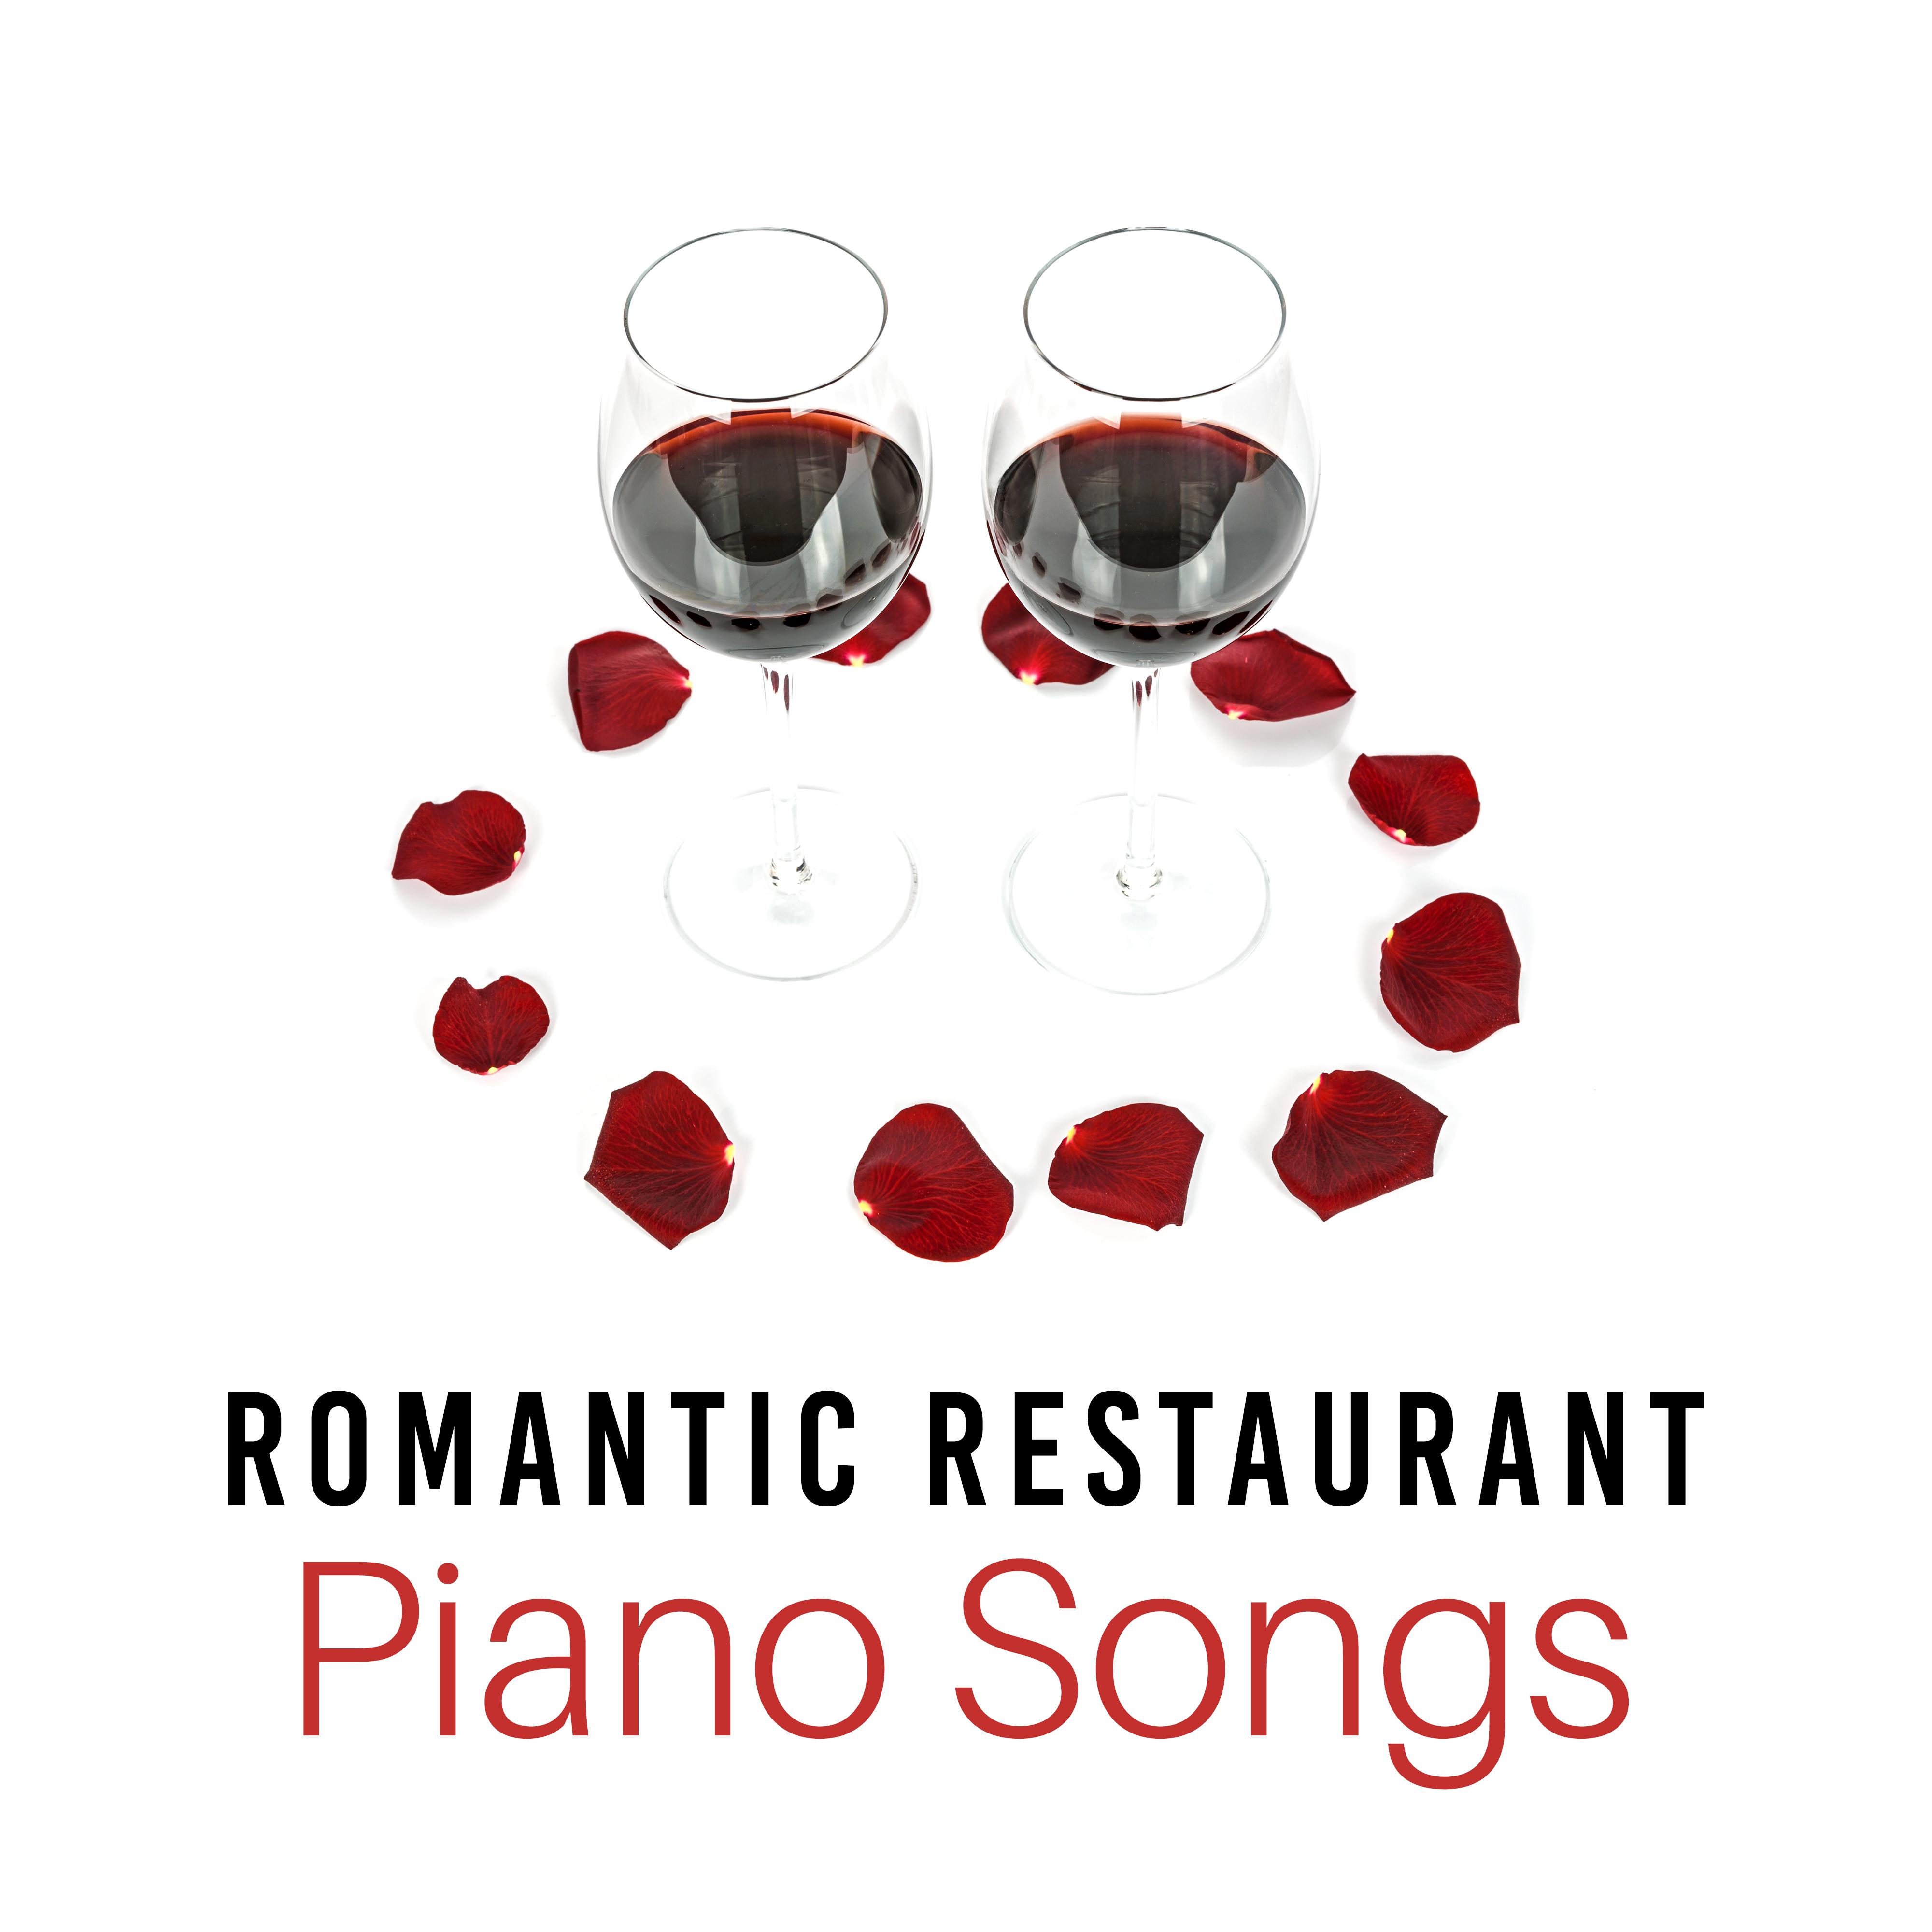 Romantic Restaurant Piano Songs  Soothing Sounds for Romantic Dinner, Candle Light Jazz, Moonlight Music